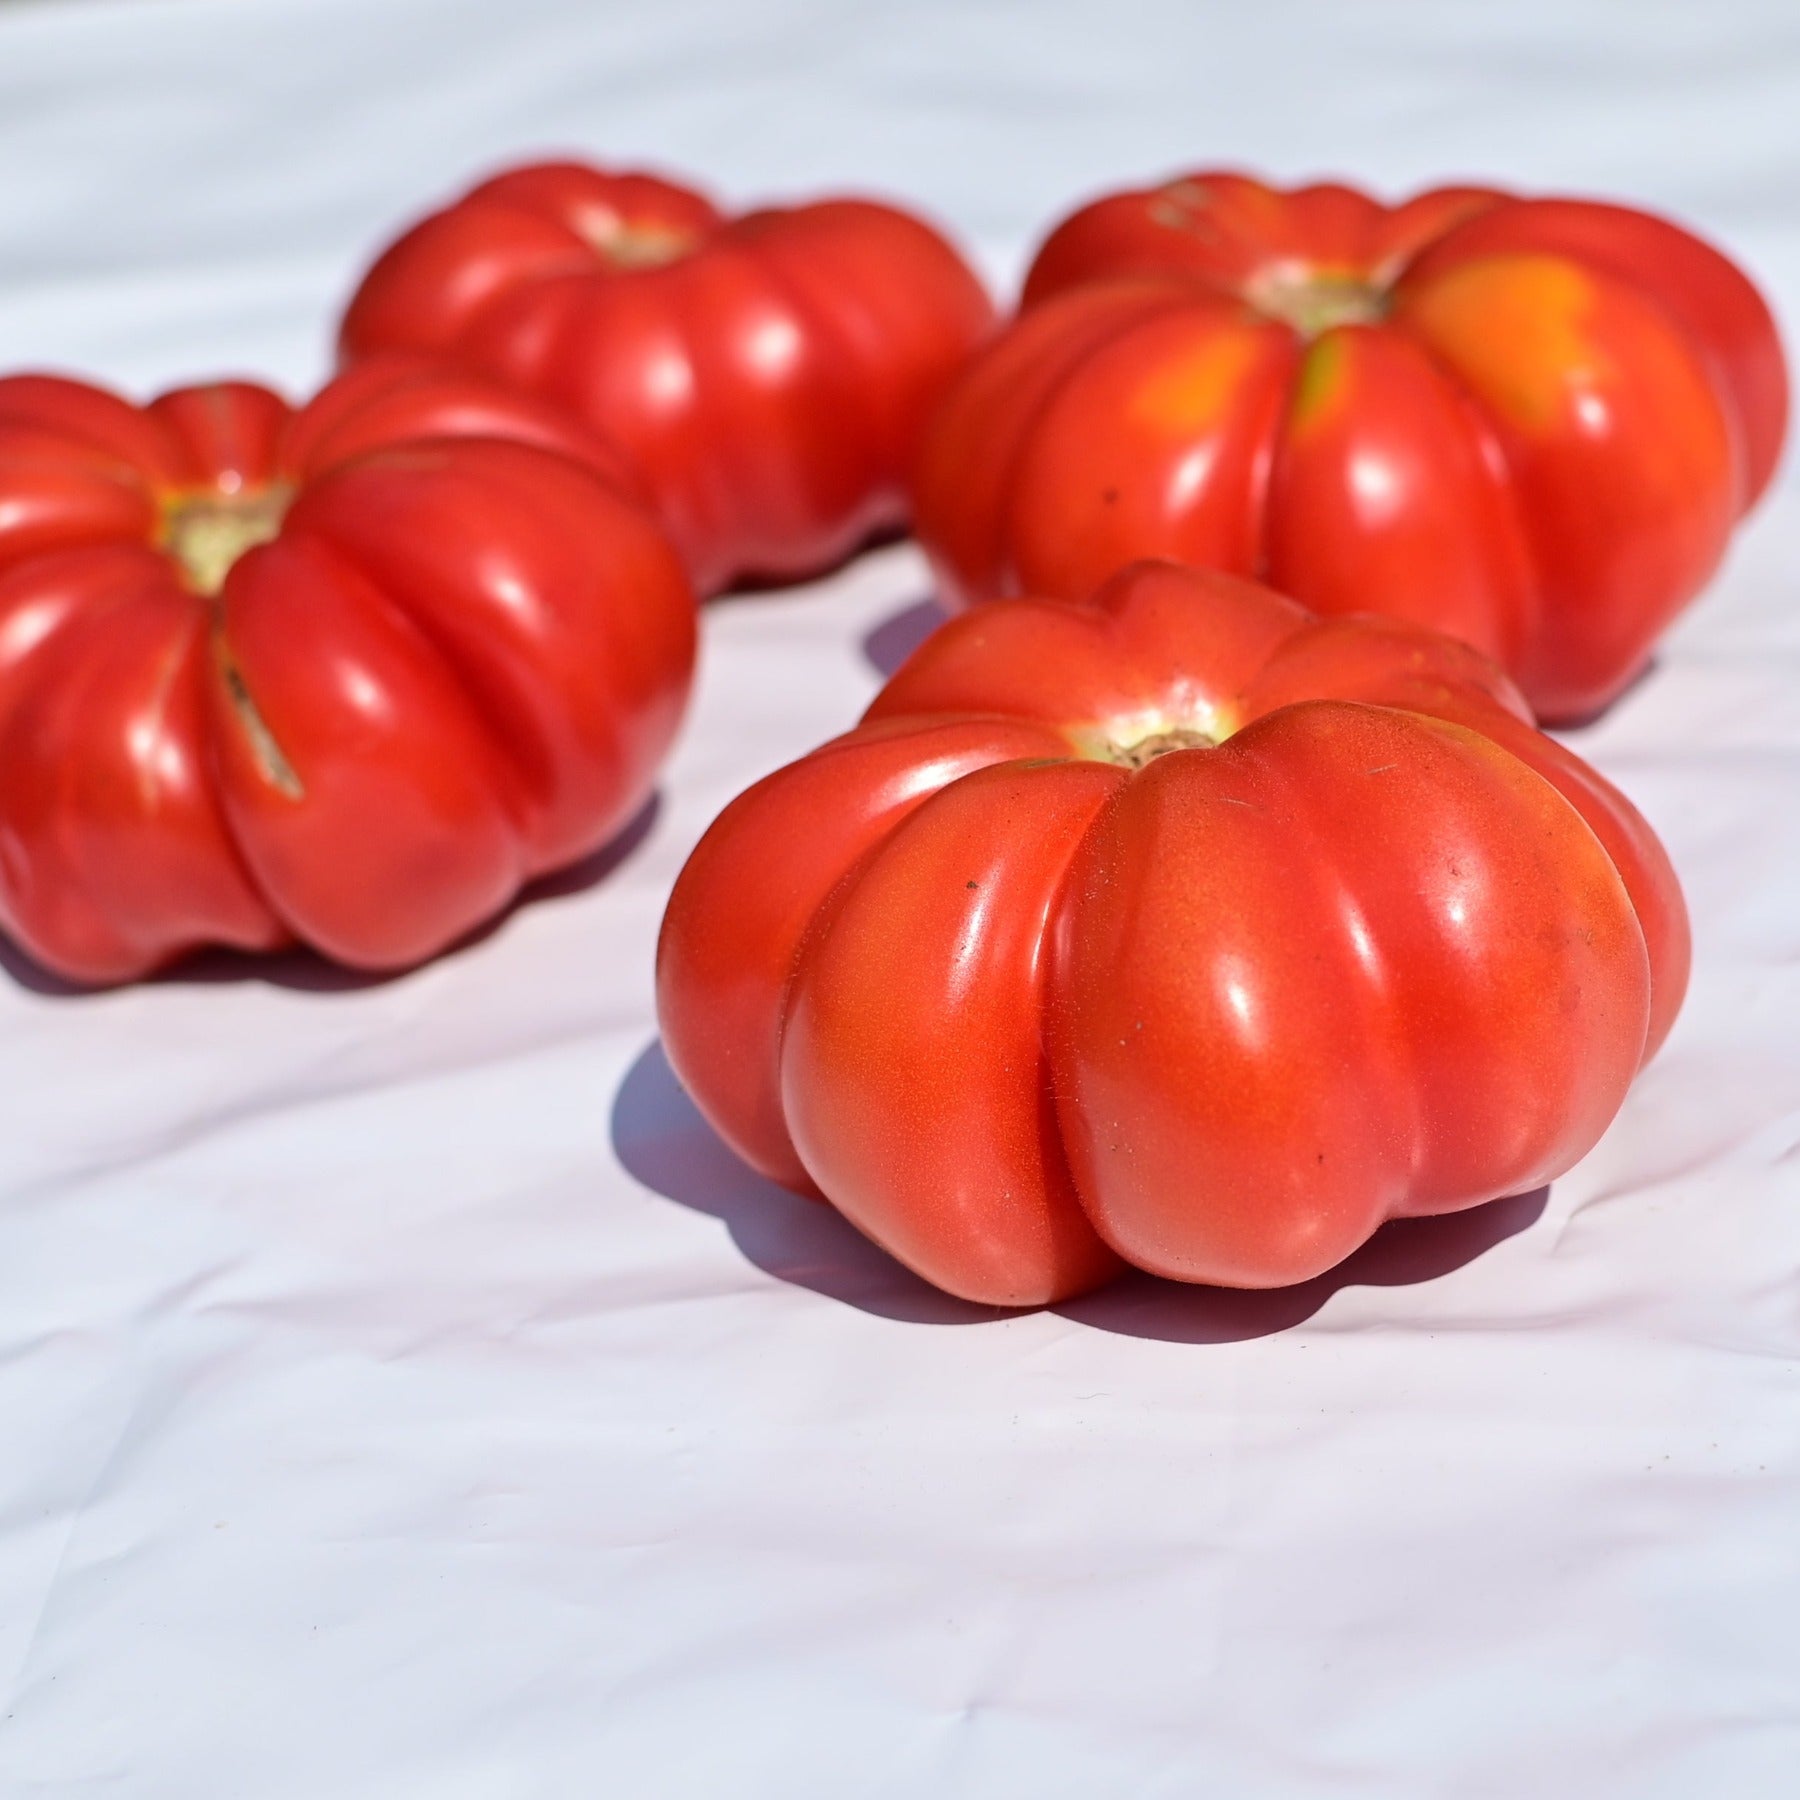 A group of pisanello tomatoes, used for bruschetta, against a white background